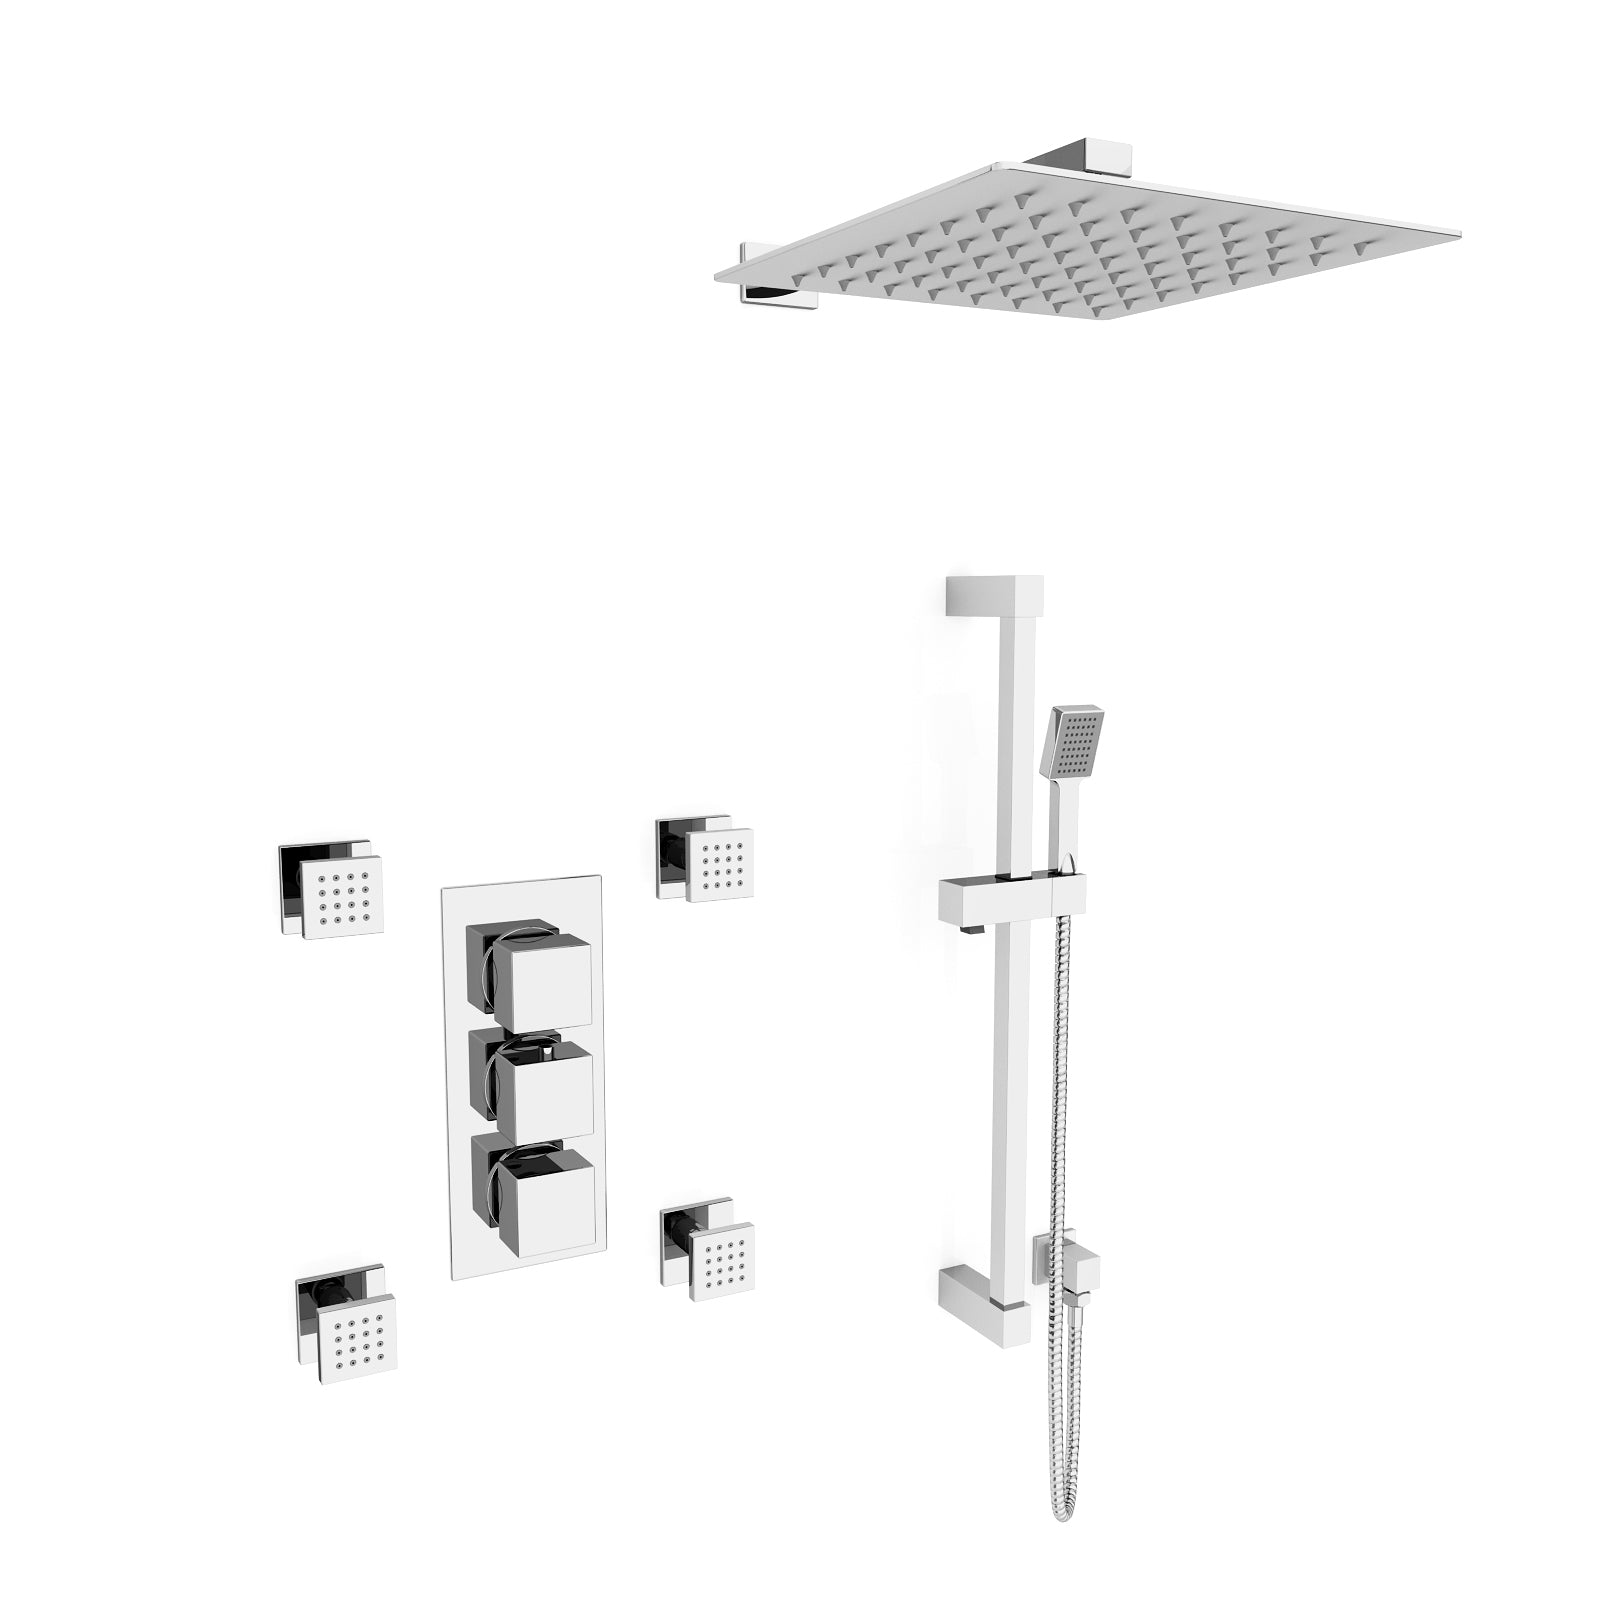 Olive Square 3 Way Concealed Thermostatic Shower Mixer Valve, Wall Shower Head, Handset, Slider Rail, 4x Body Jets Set Chrome